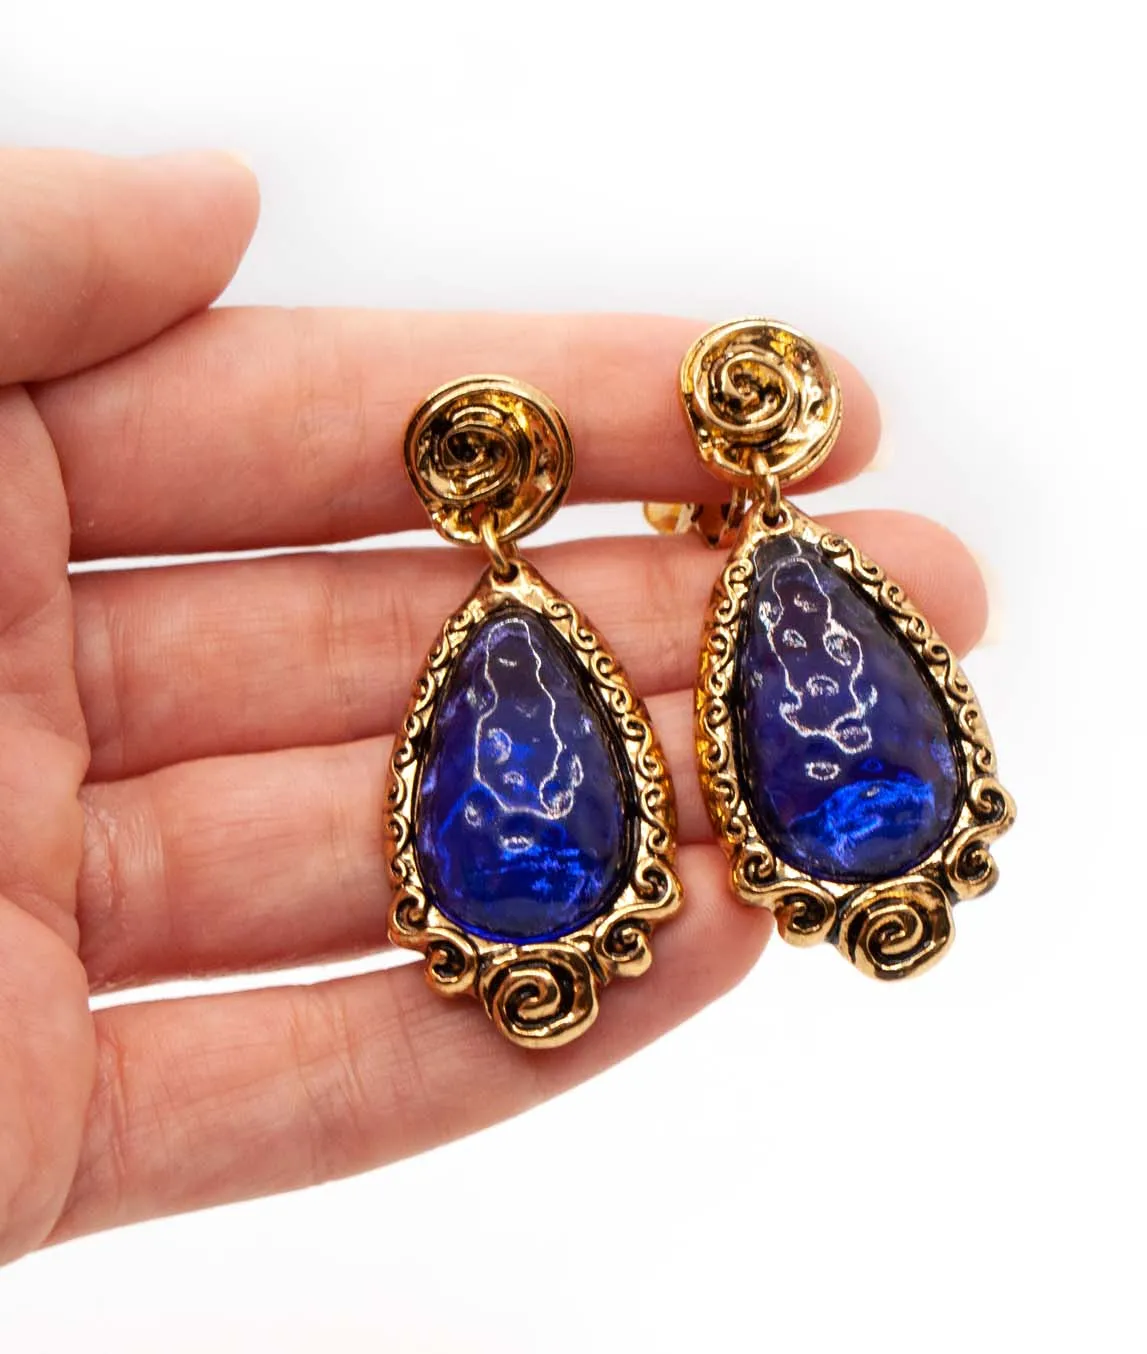 Christian Lacroix Blue Glass Dangle Earrings in a heavy textured gold tone frame held in a hand